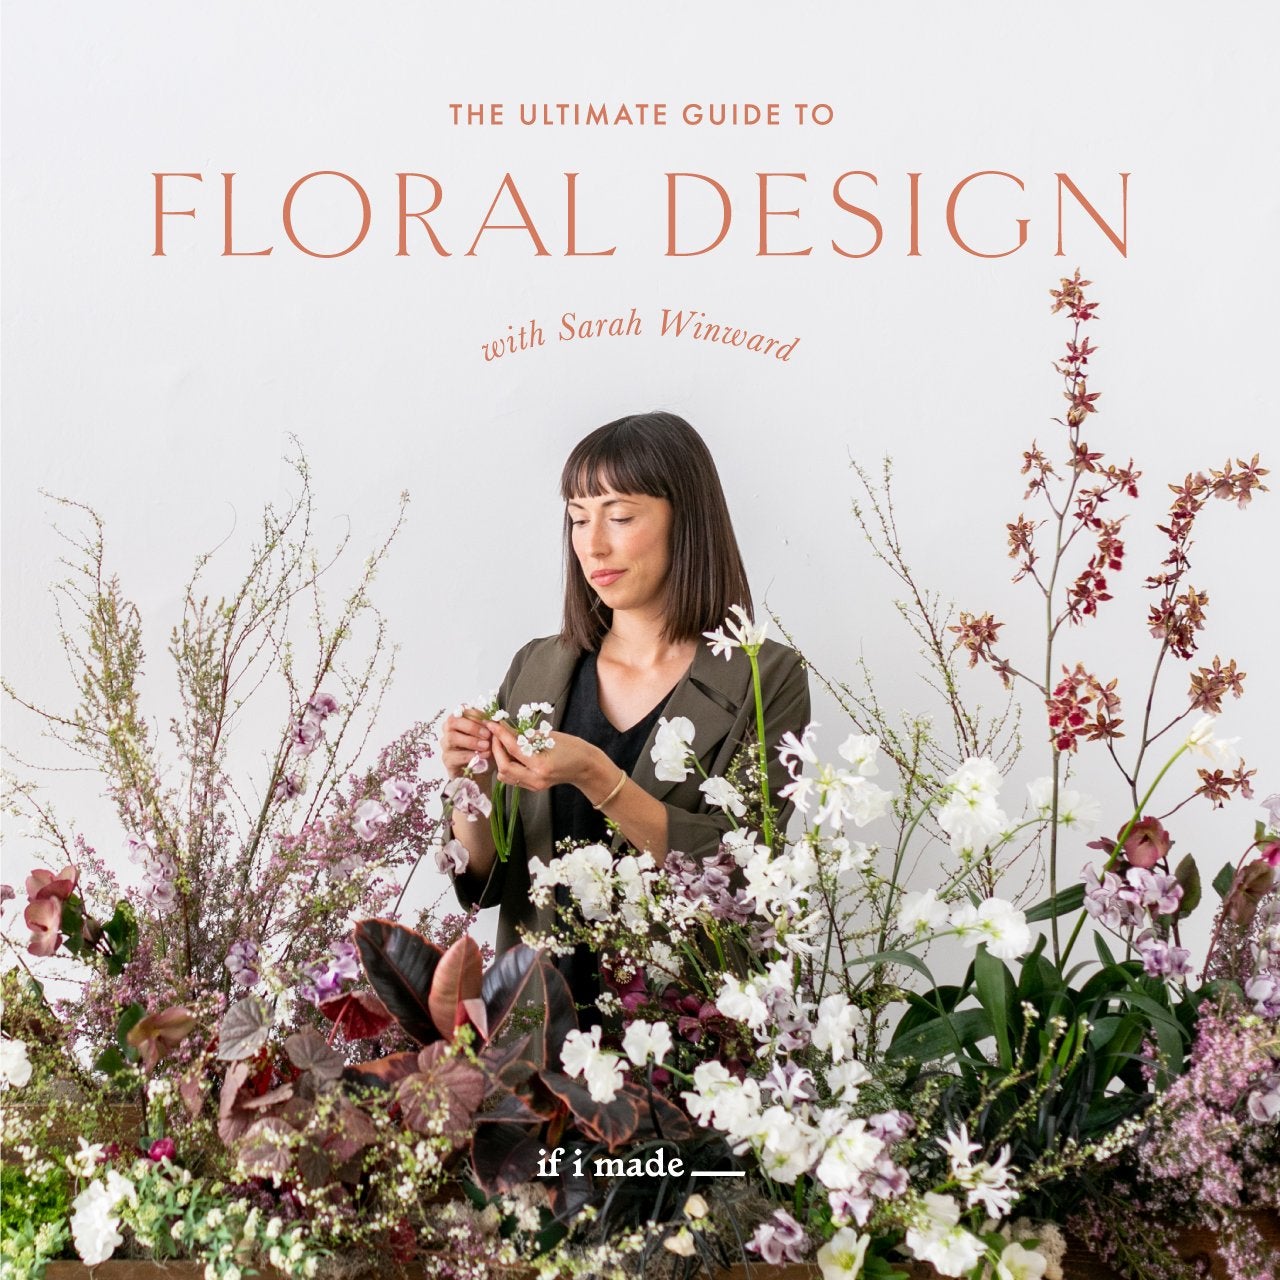 The Ultimate Guide to Floral Design with Sarah Winward (SOP0422)